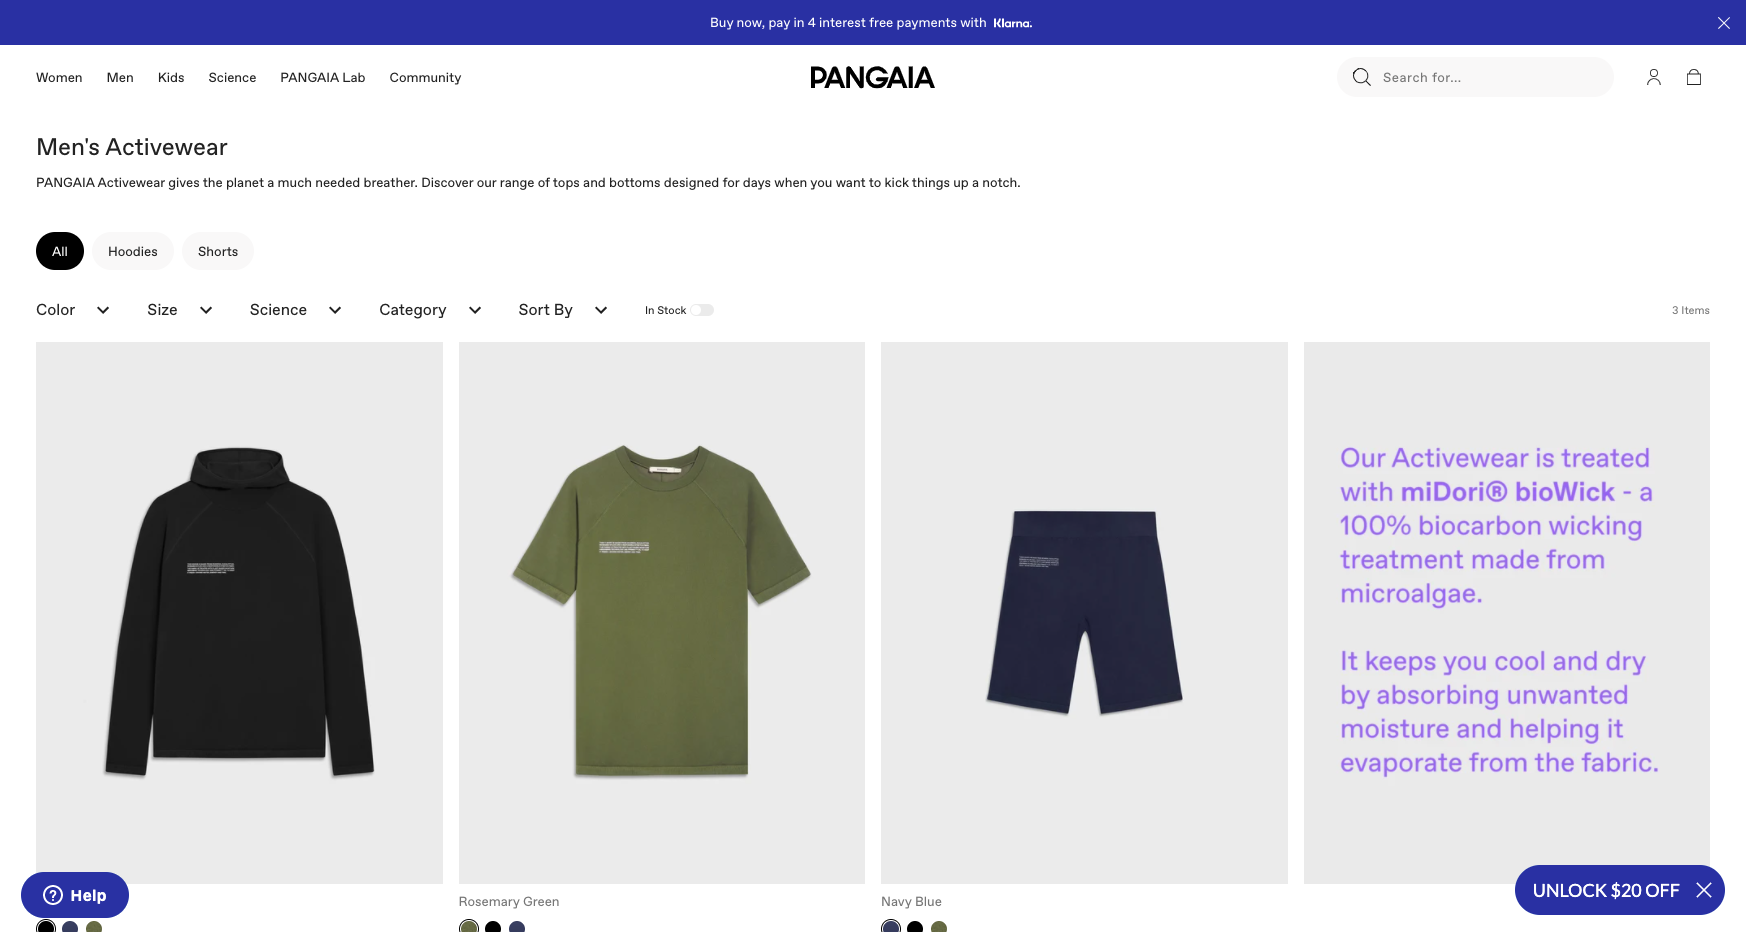 pangaia collection page men's activewear